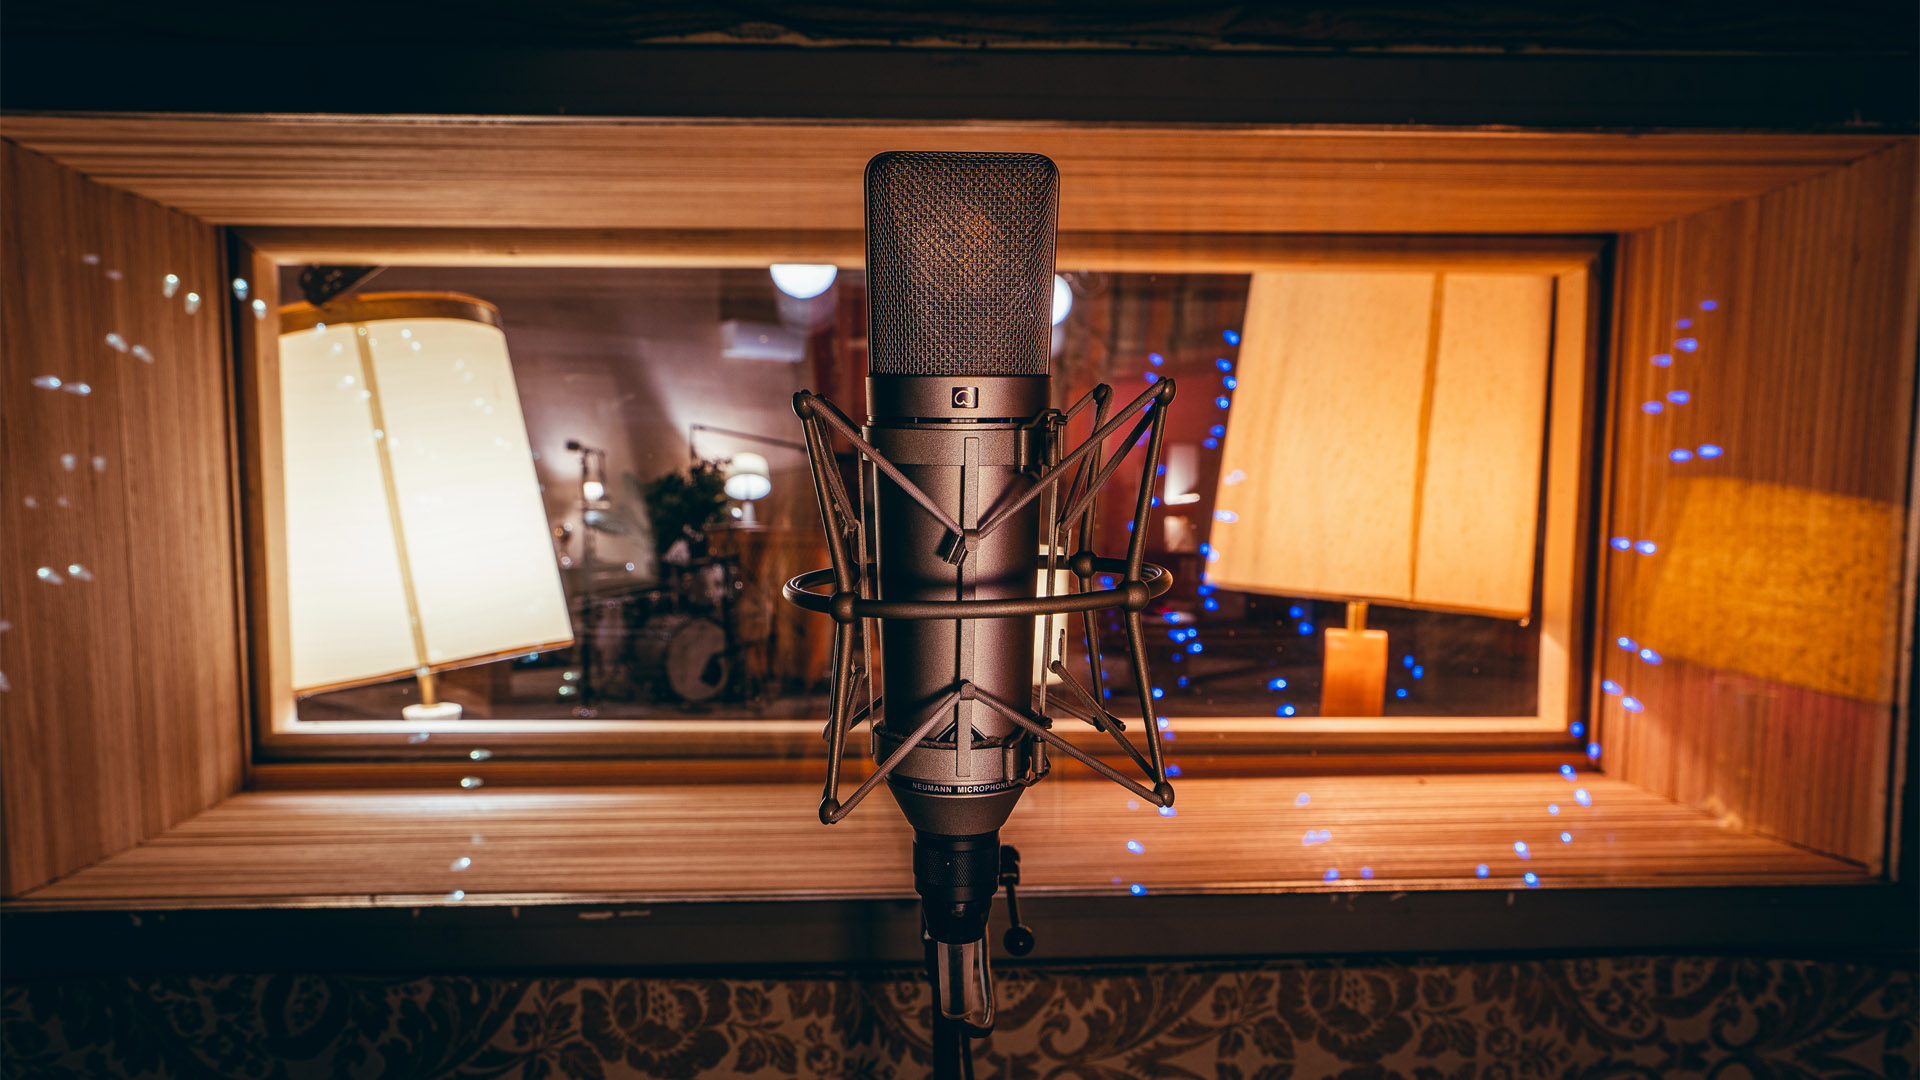 Large image from within a whisper room looking out into the studio, with a microphone front and center.